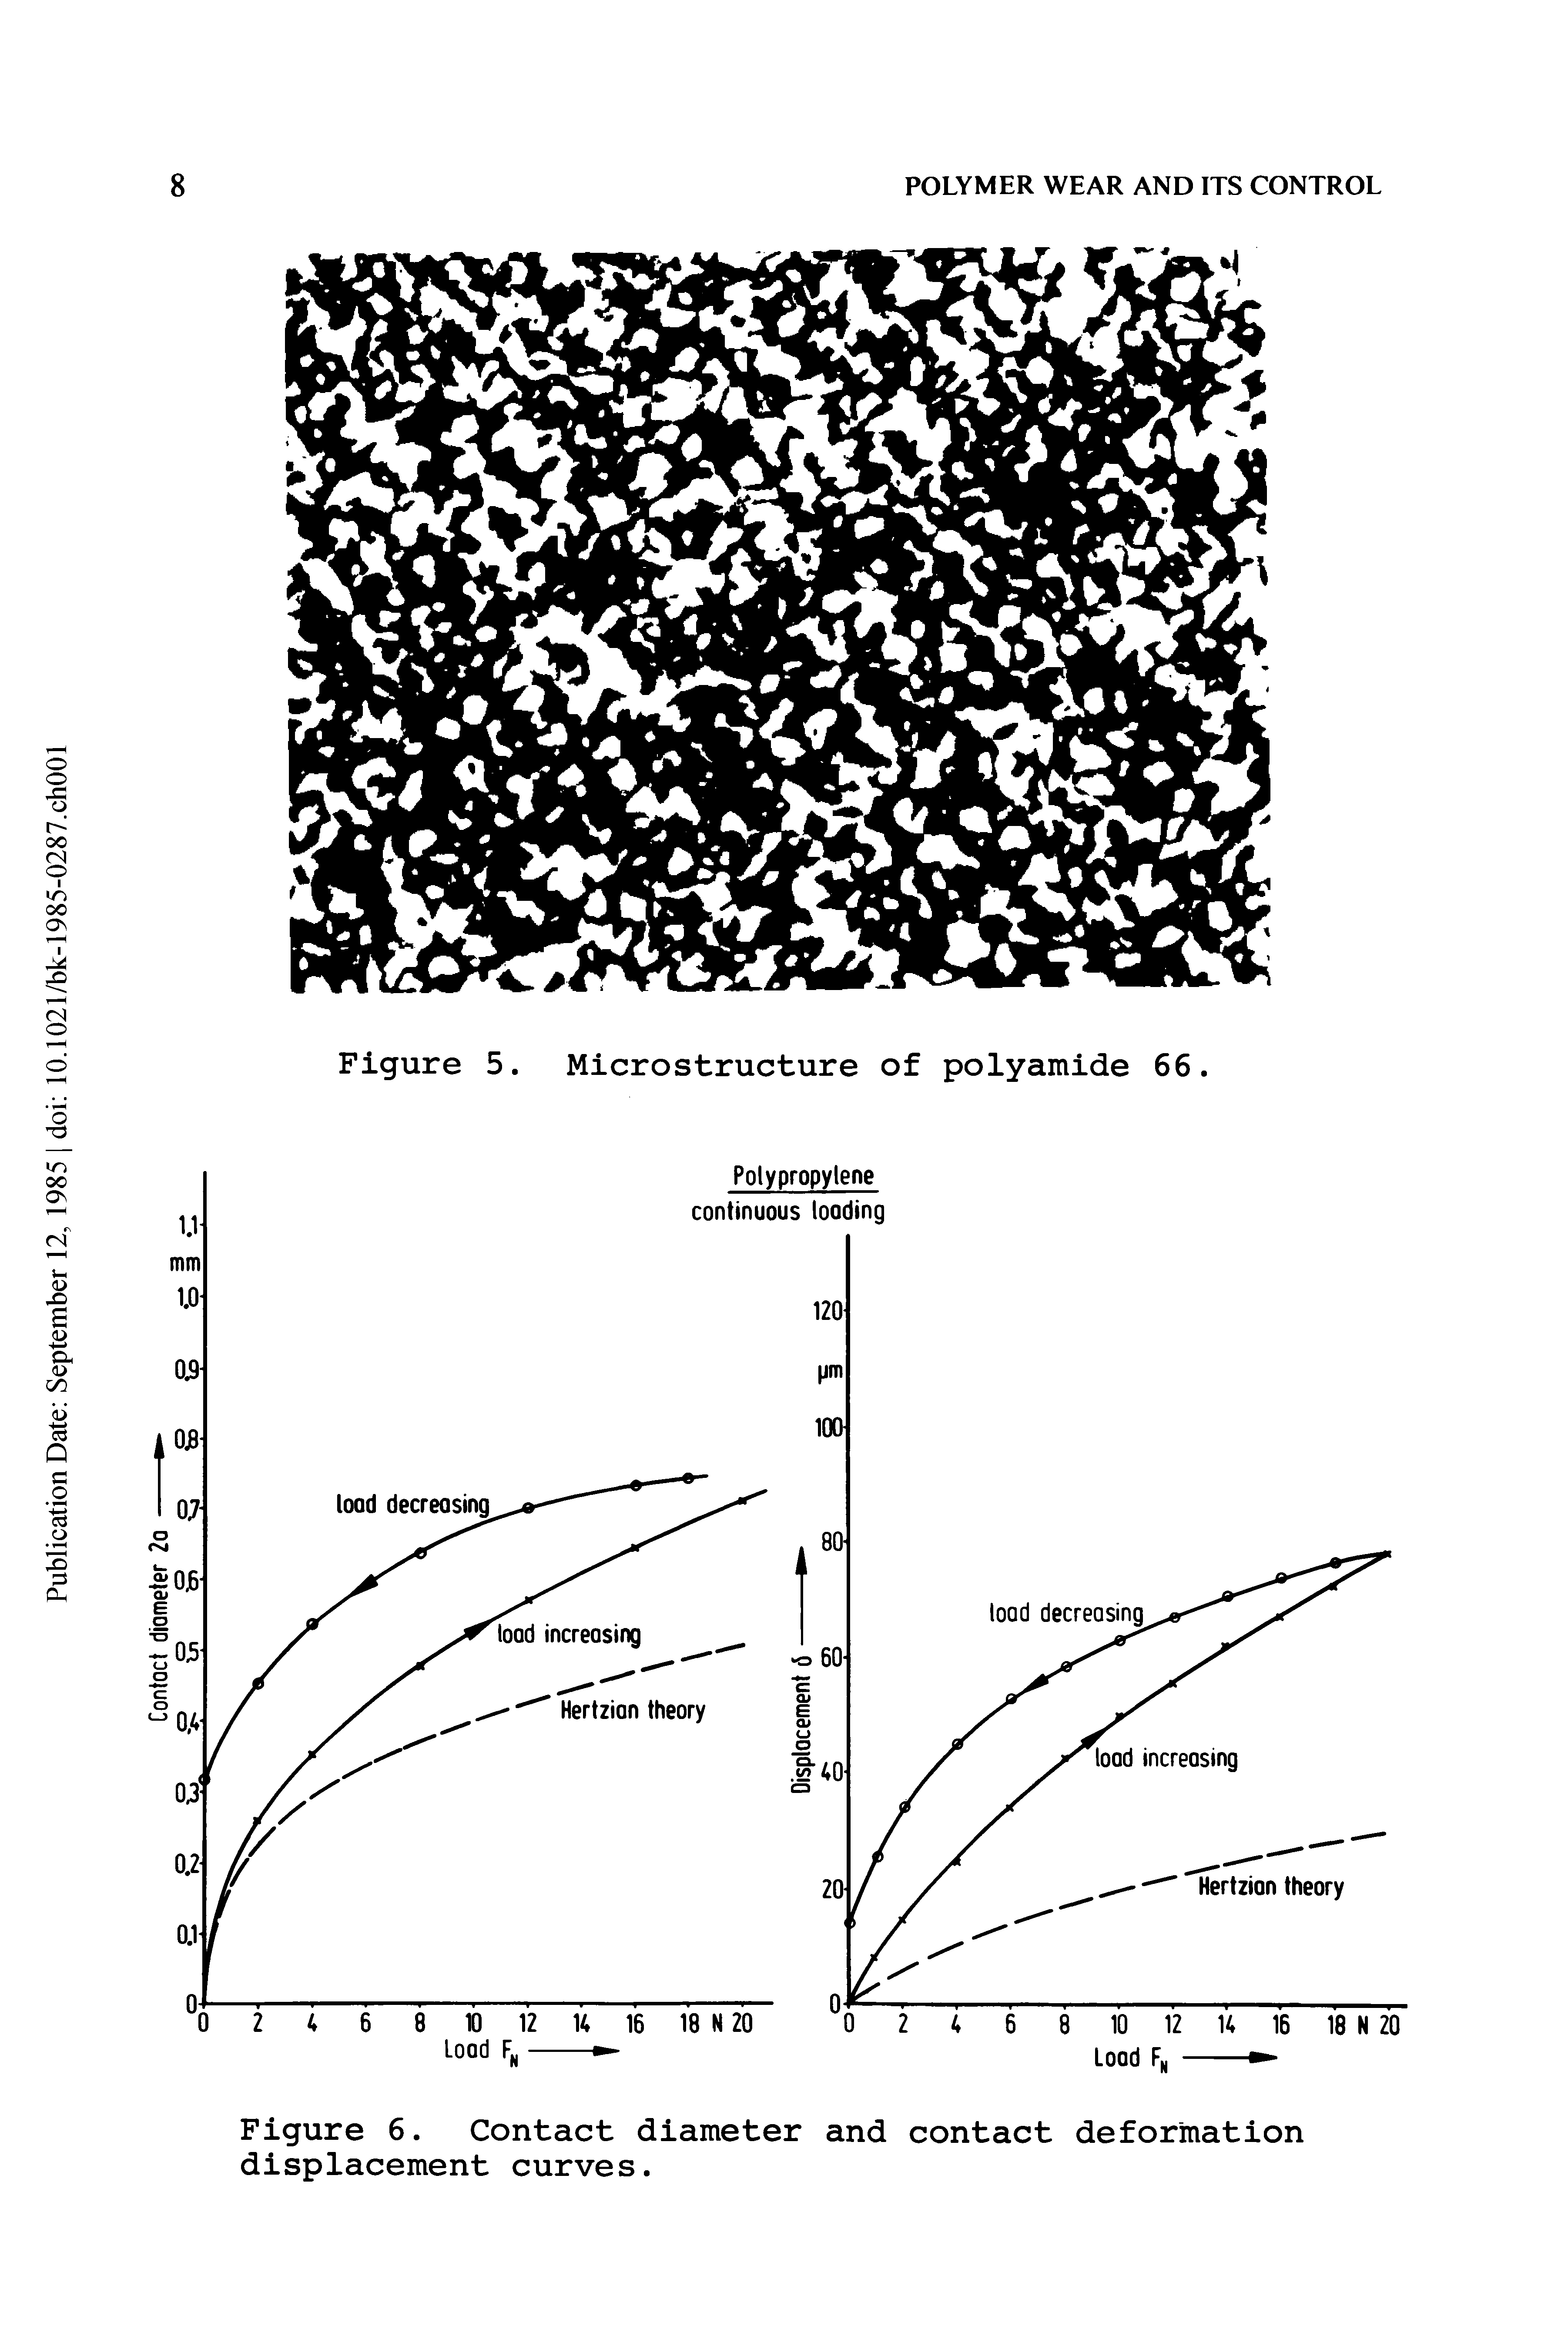 Figure 6. Contact diameter and contact deformation displacement curves.